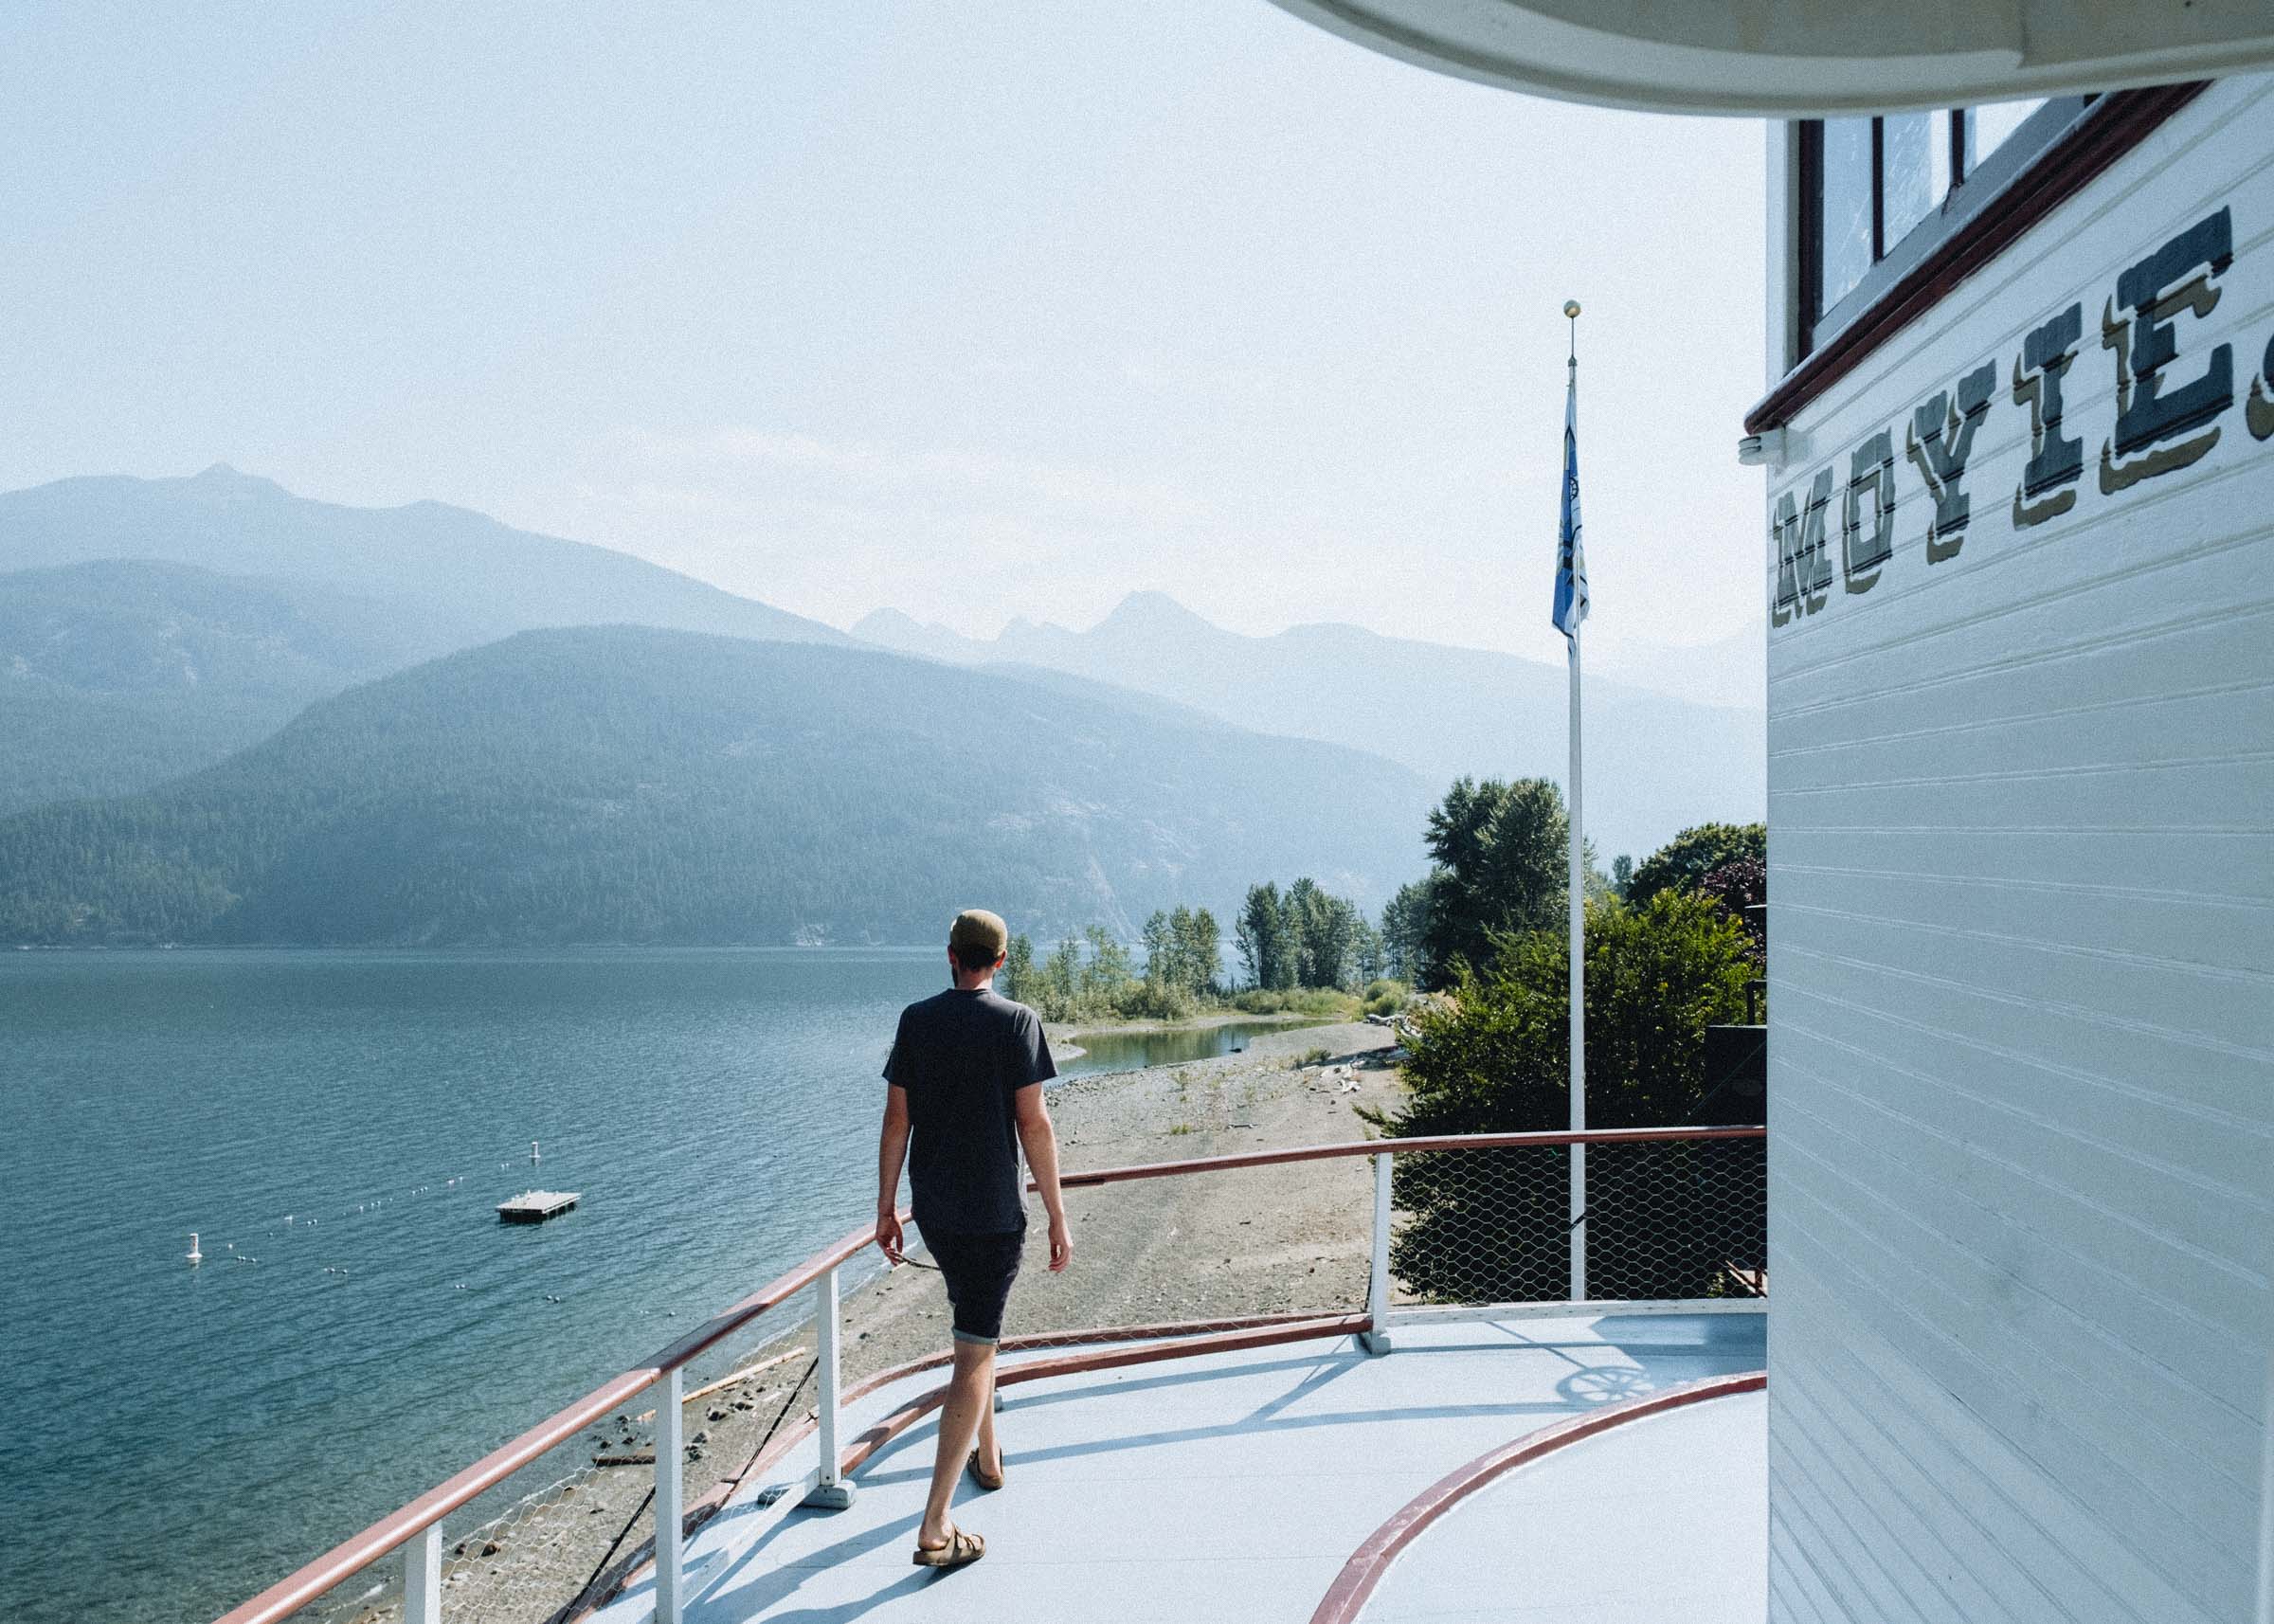 On deck and docked on the shores of Kootenay Lake